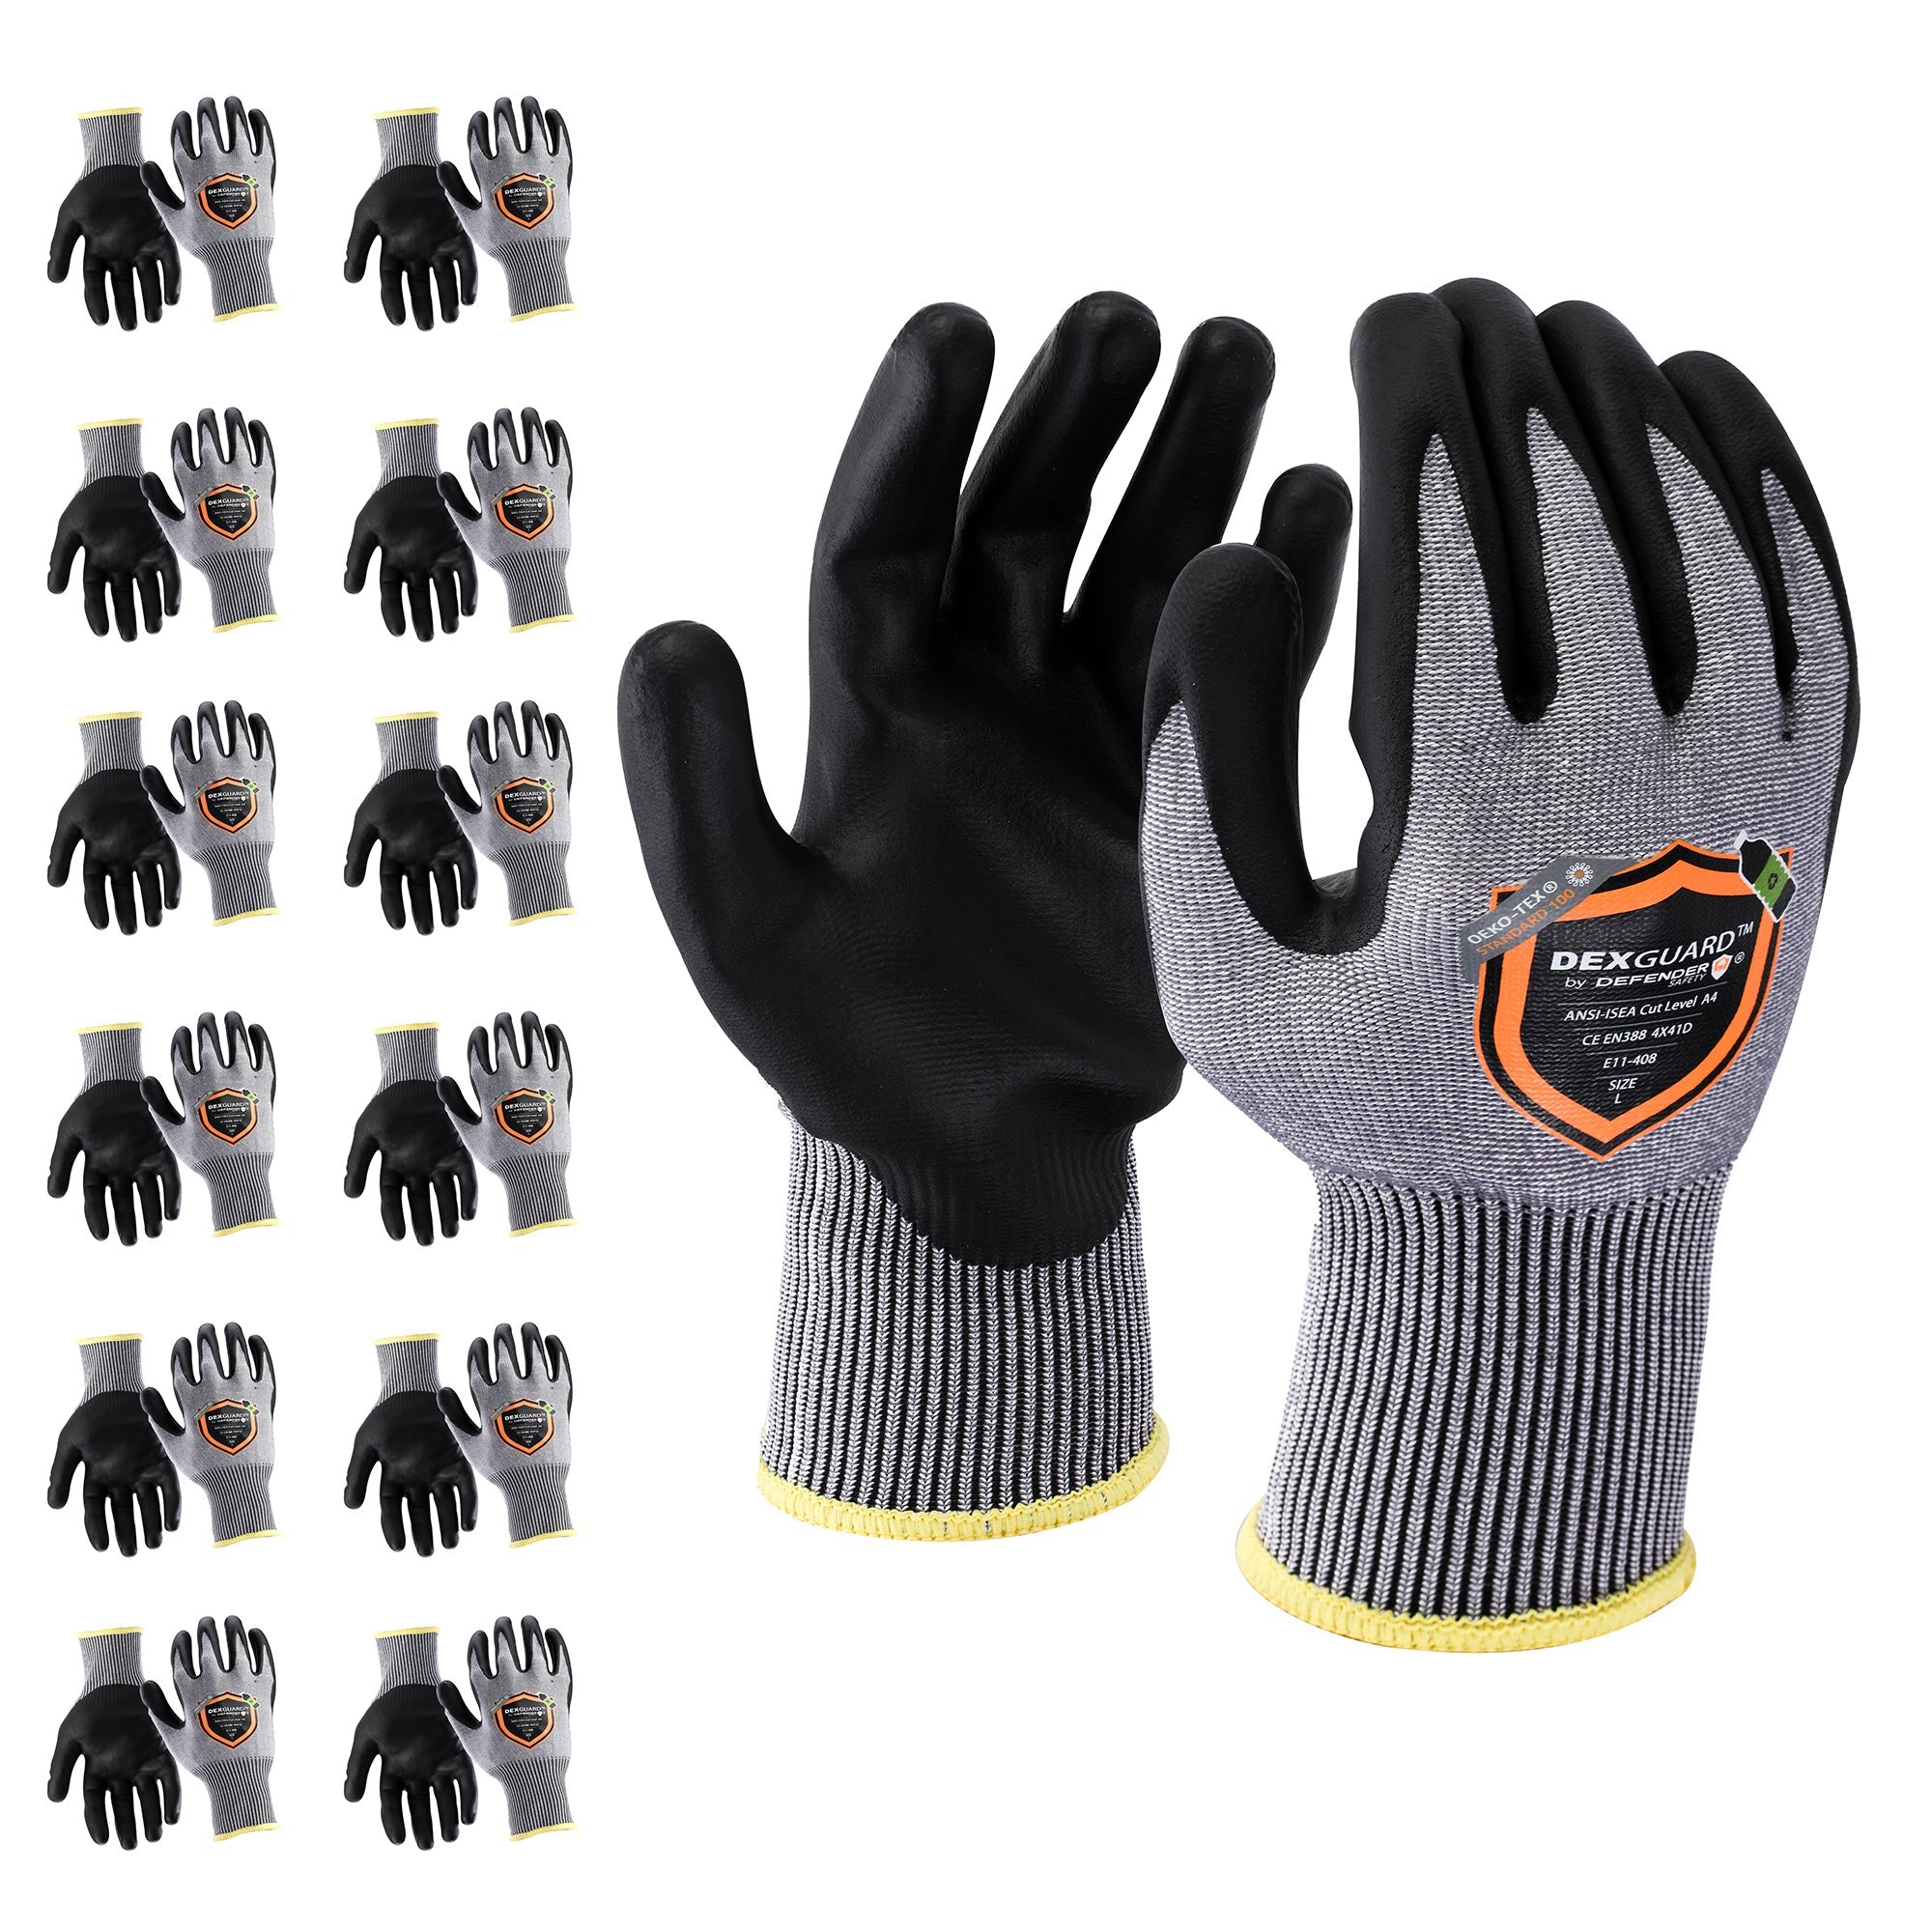 Tac-CR Cut Resistant Glove: ANSI Class 4 Protection